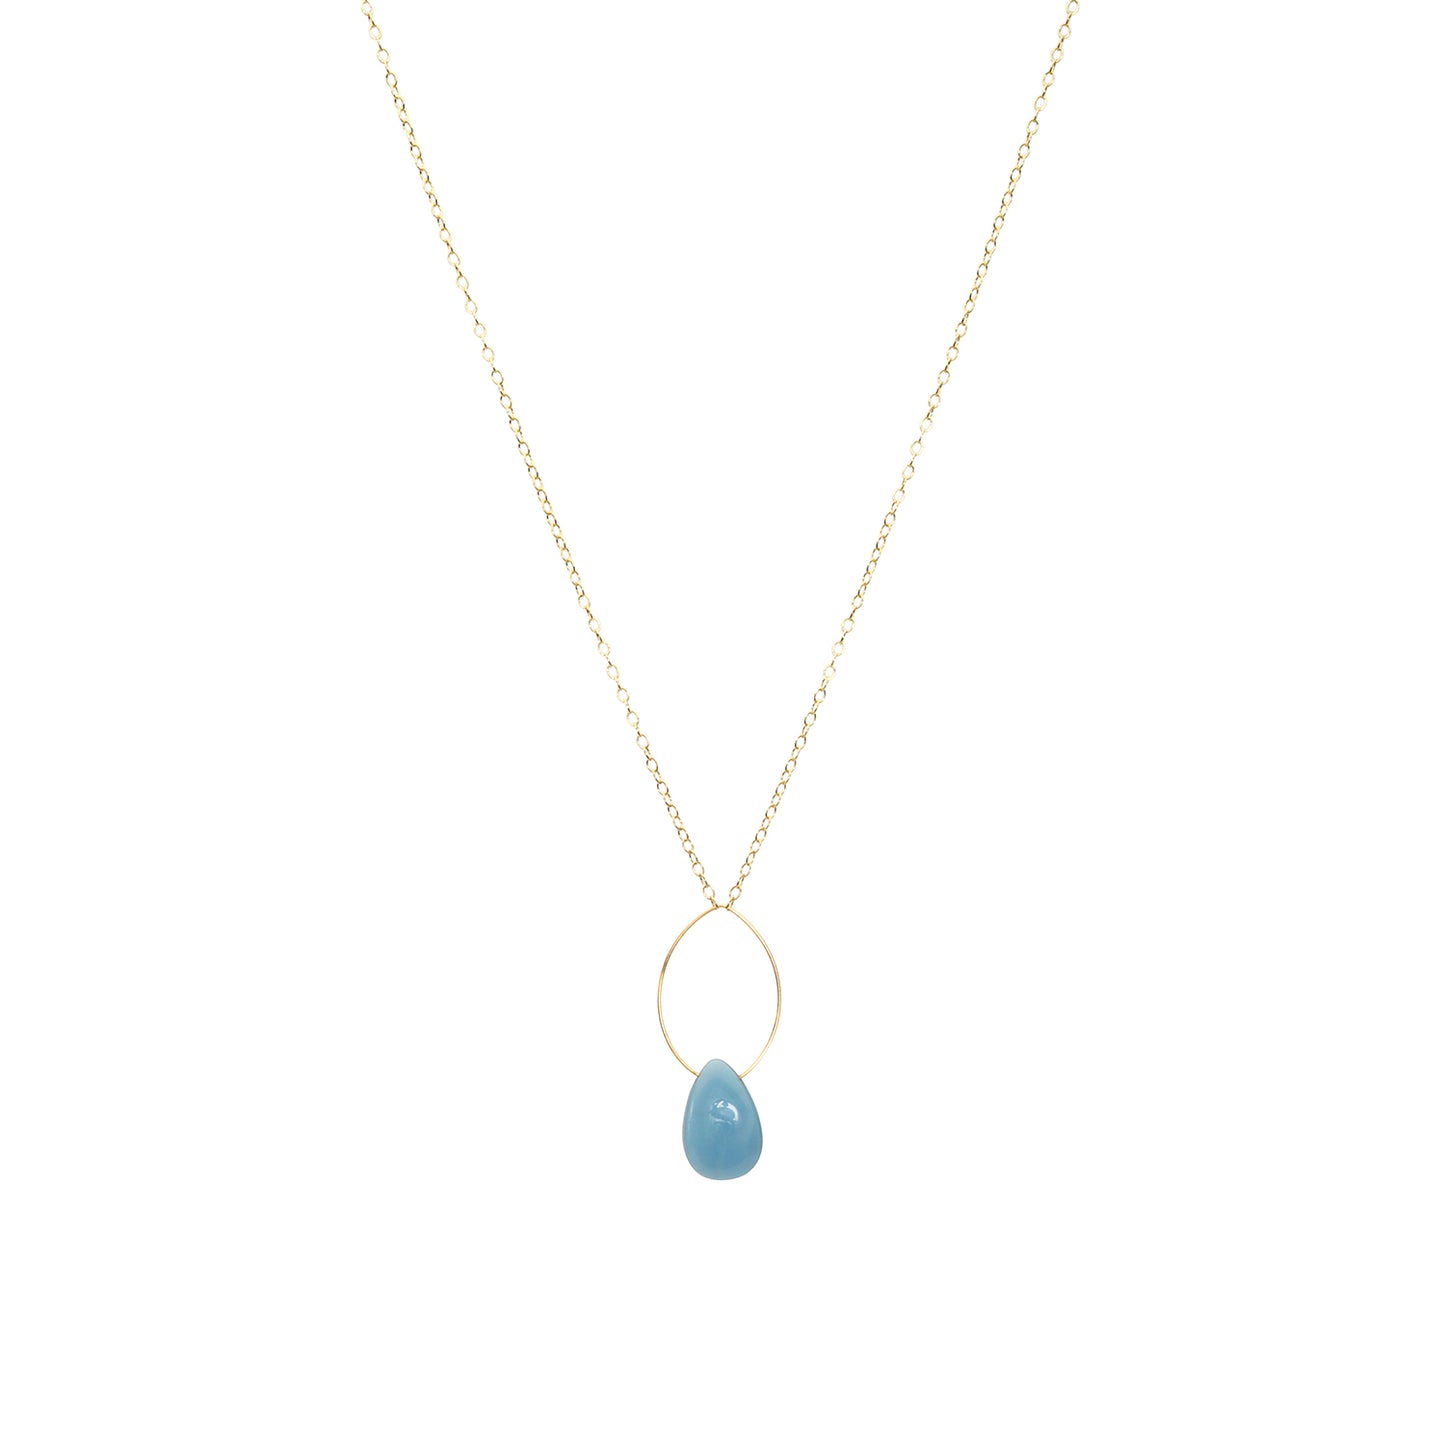 Oval Pendant Necklace with Angelite